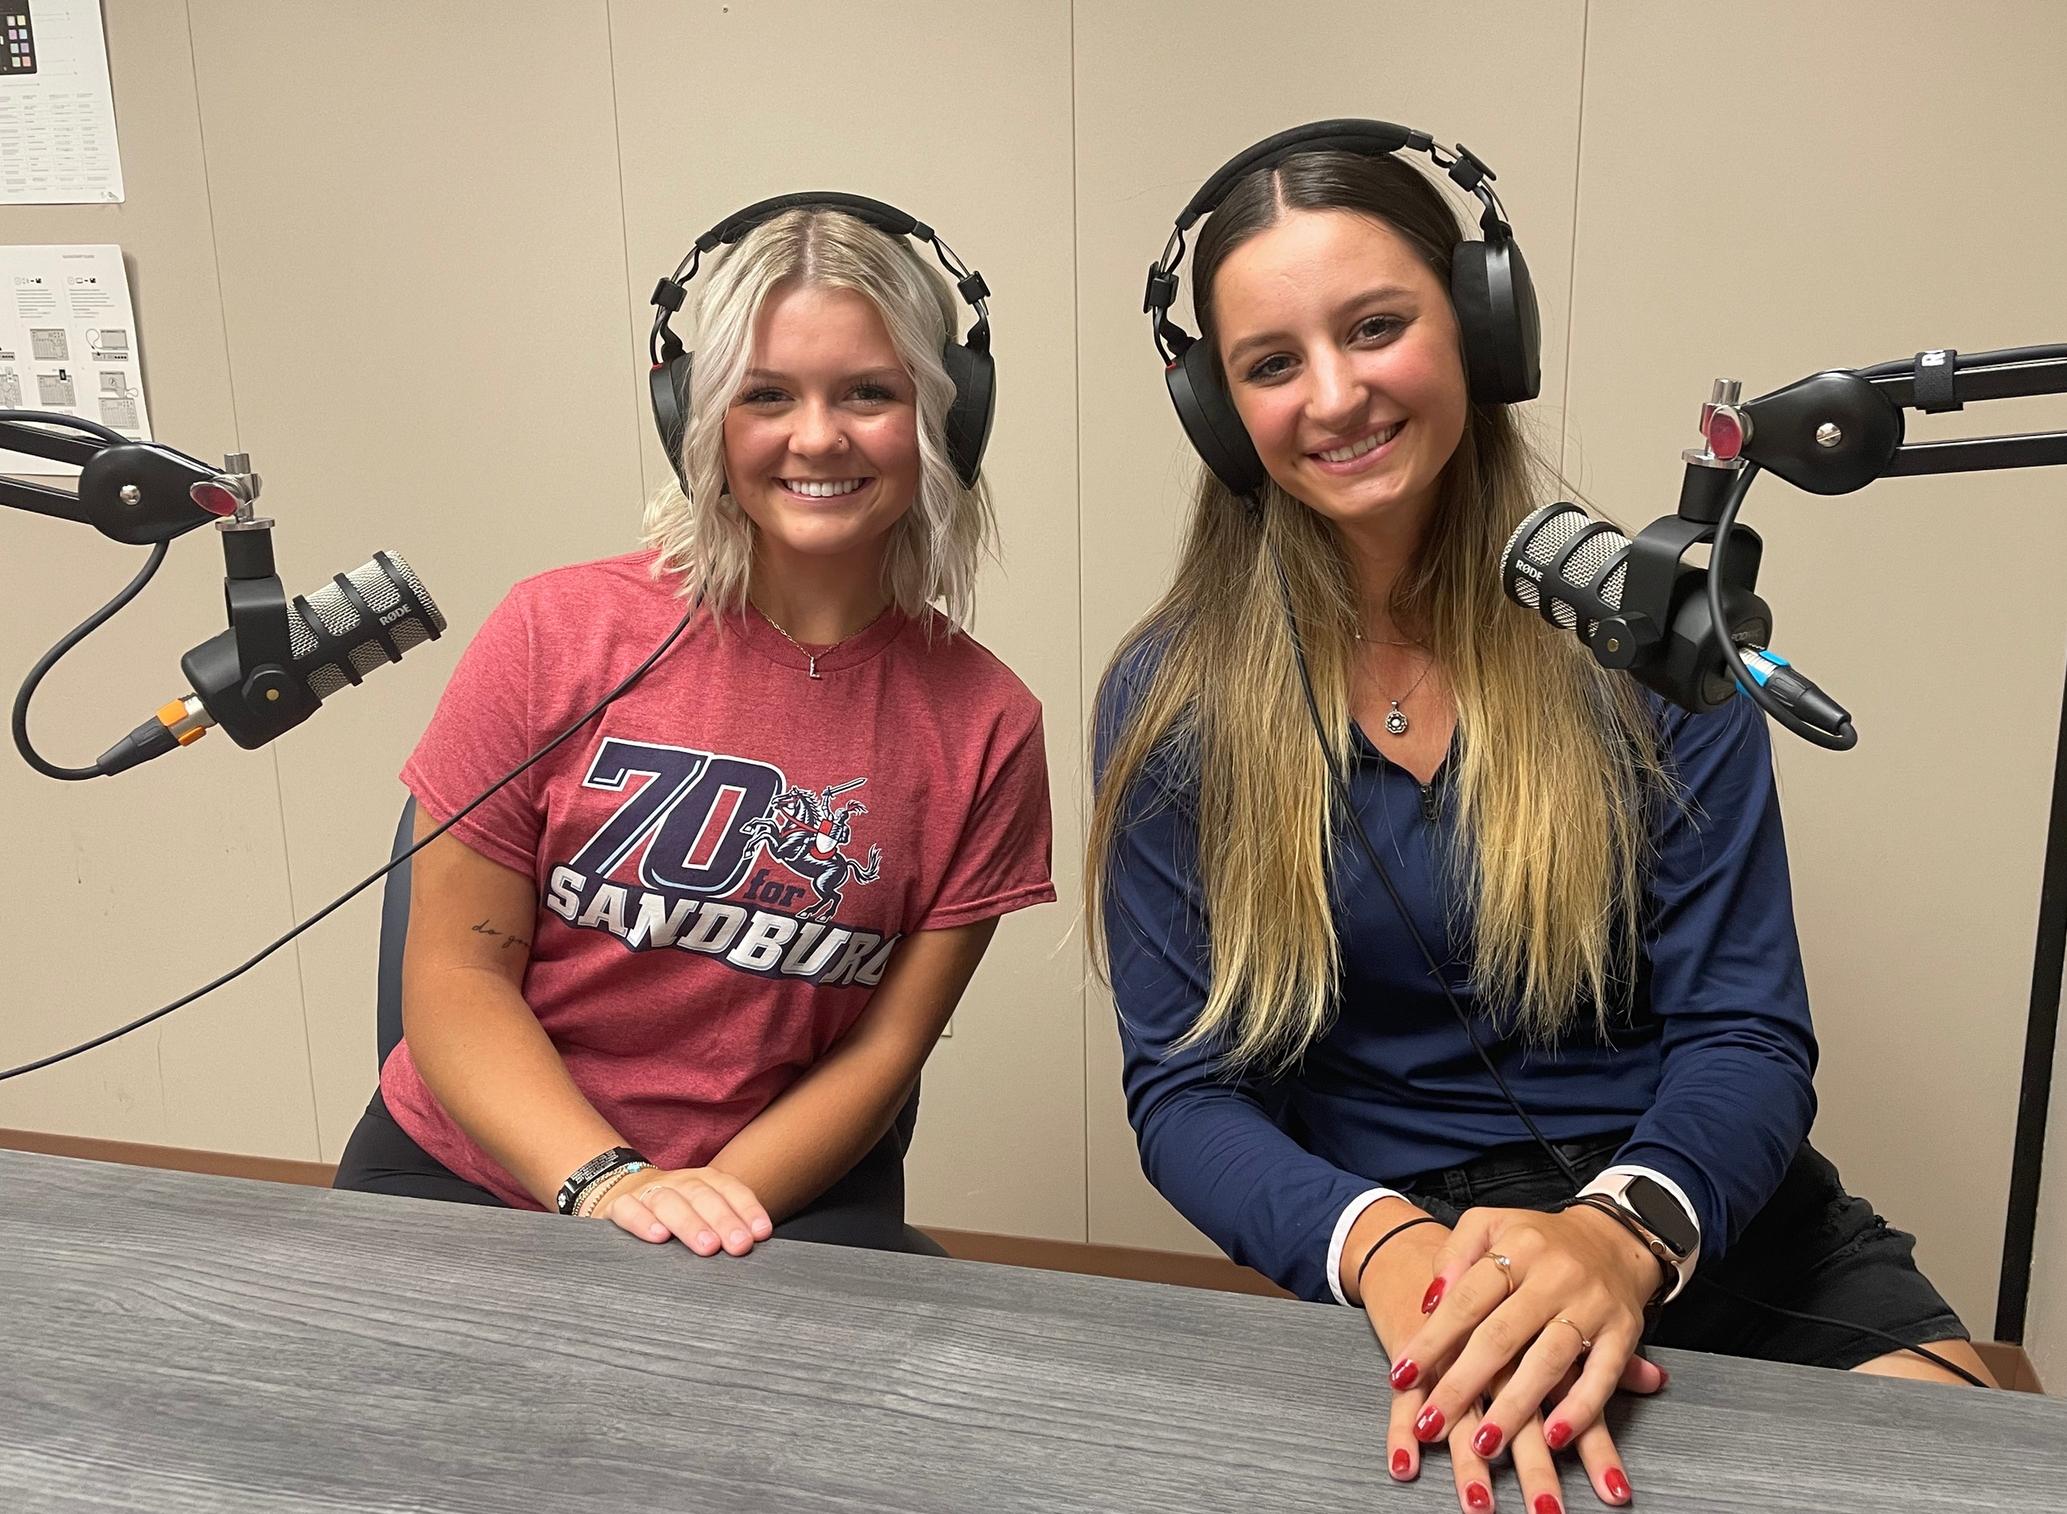 Sandburg women's golfers Ellie Wasson (left) and Ava Hackman (right) were the guests on Episode 17 of the Sandburg Athletics Podcast.